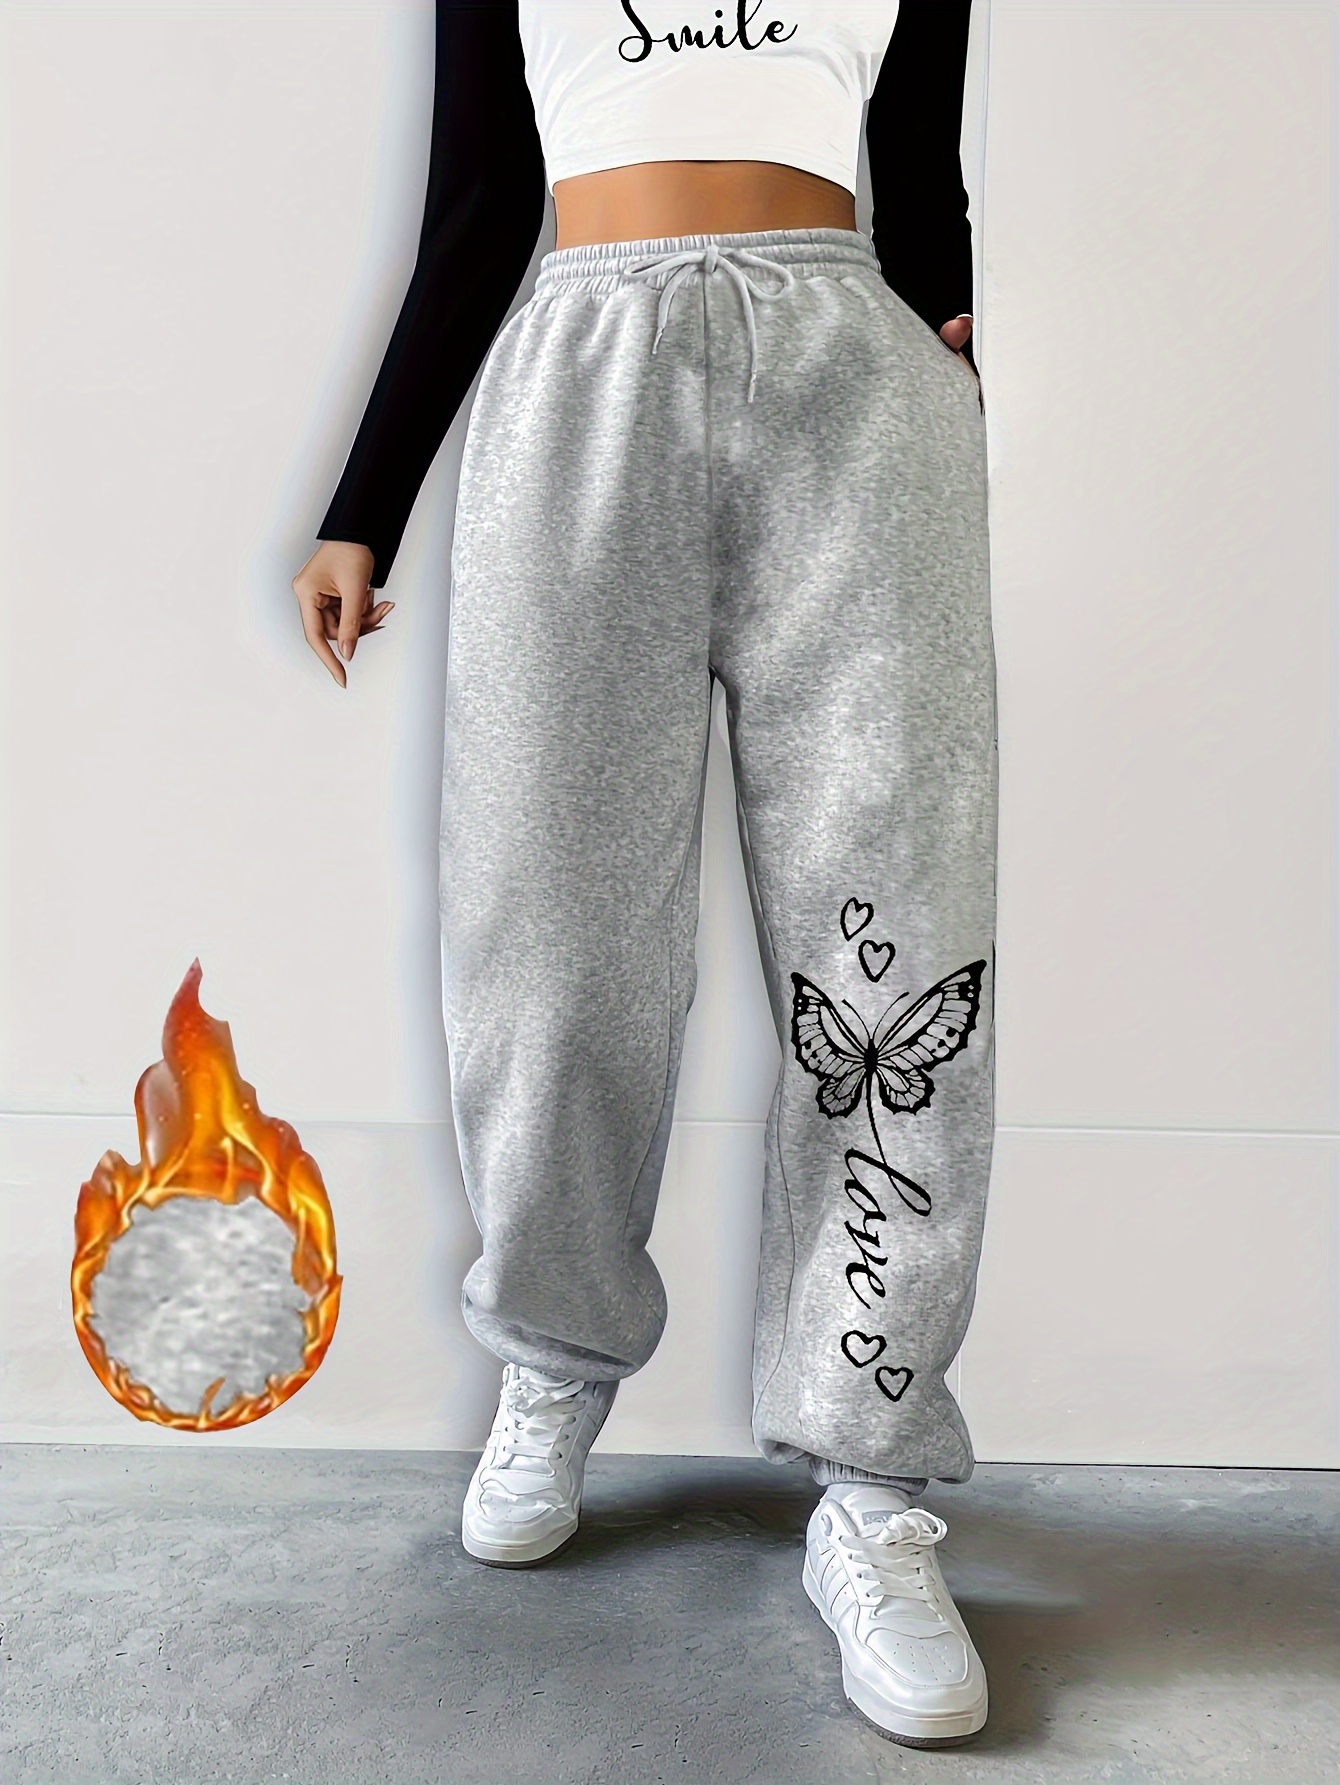 Butterfly Print Drawstring Pants, Versatile Comfy Loose Sweatpants For Fall  & Winter, Women's Clothing